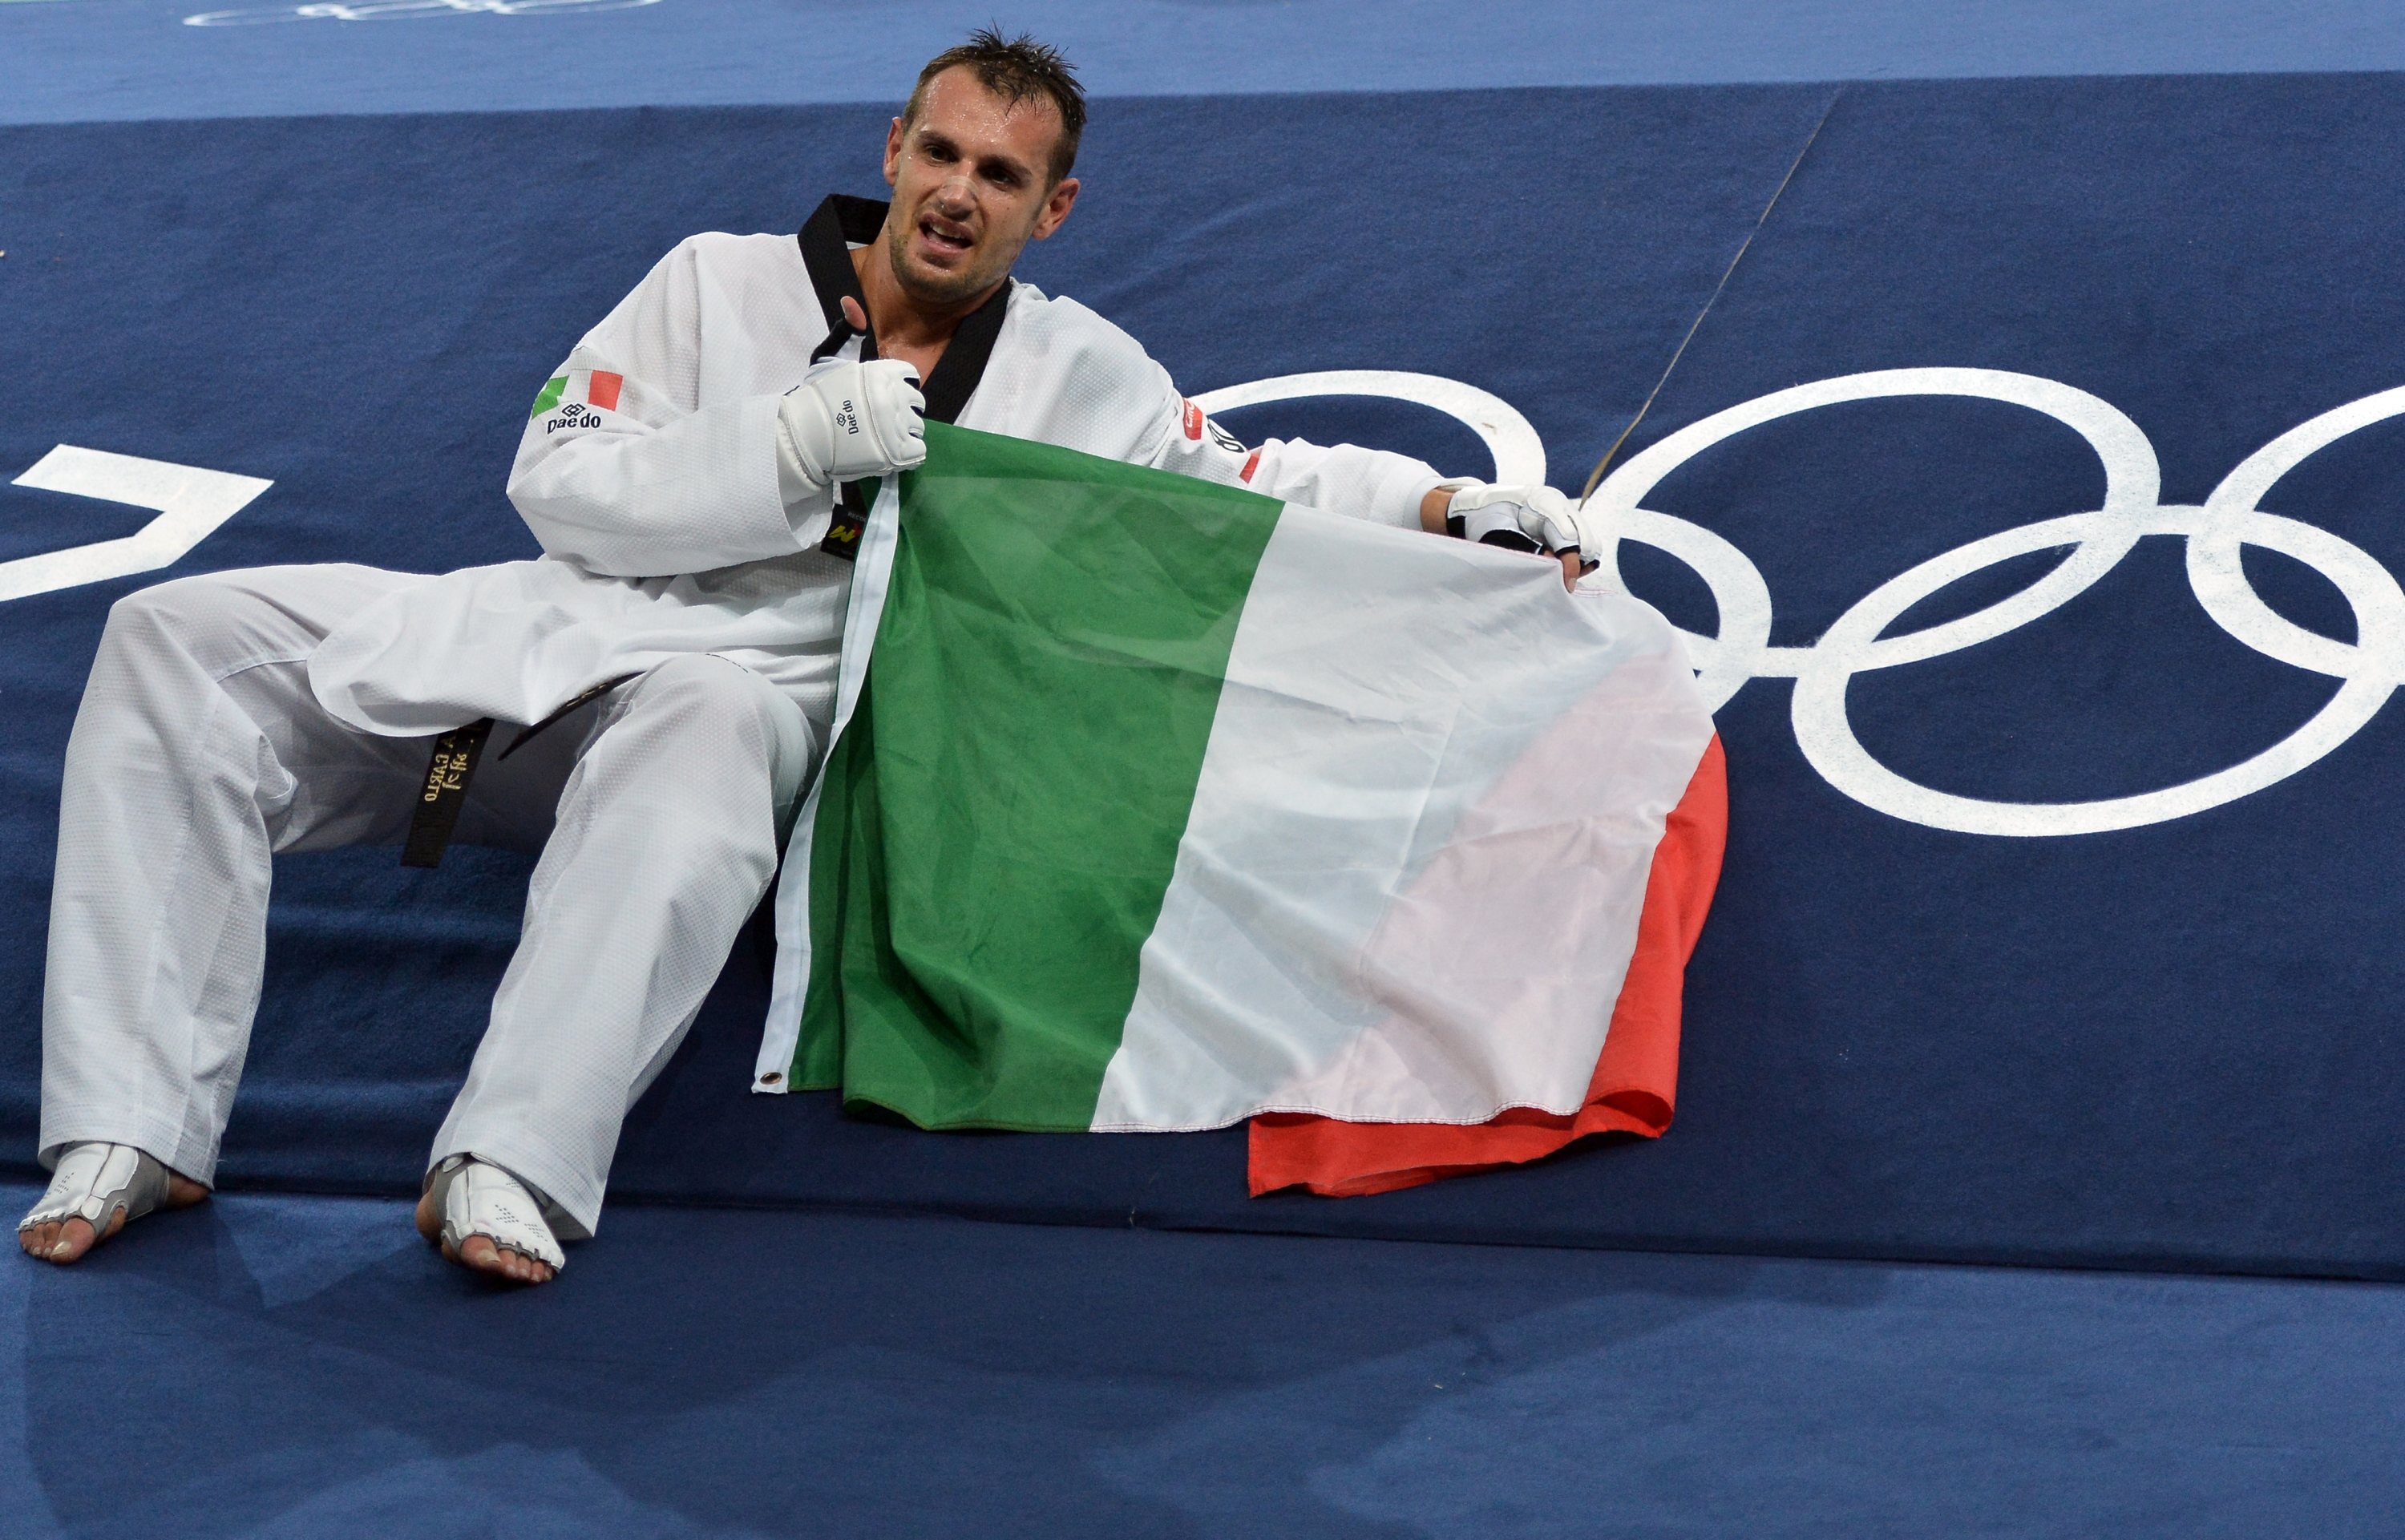 Italy's Carlo Molfetta celebrates his victory over Gabon's Anthony Obame at the end of their men's taekwondo gold medal bout in the + 80 kg category as part of the London 2012 Olympic games, on August 11, 2012 at the ExCel centre in London. AFP PHOTO / ALBERTO PIZZOLI (Photo by ALBERTO PIZZOLI / AFP)